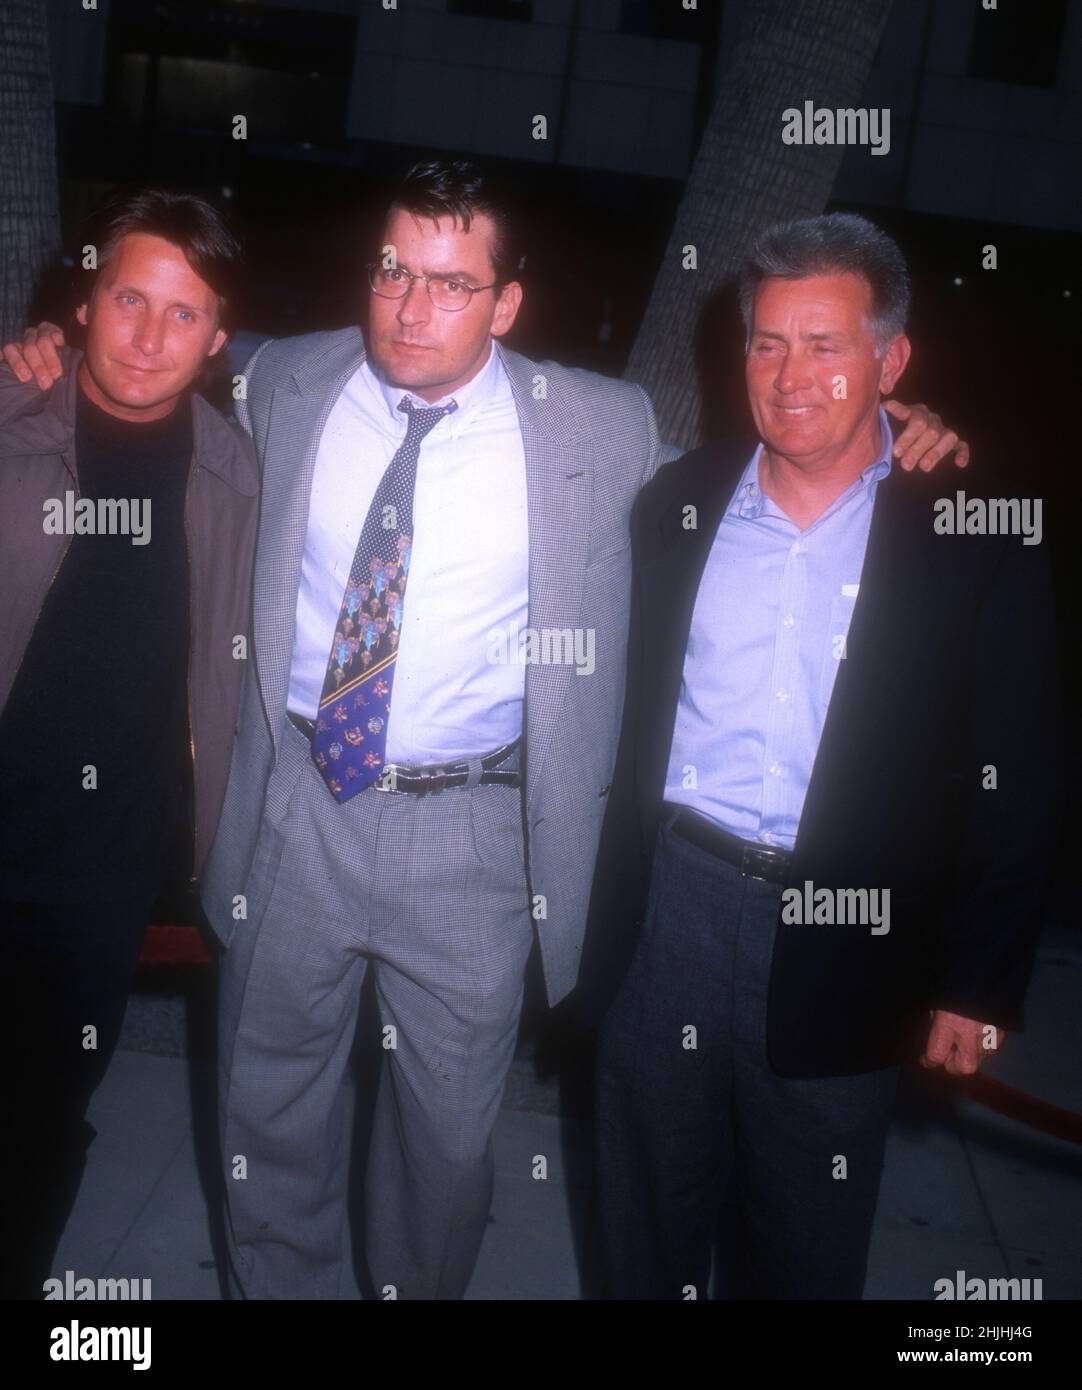 Beverly Hills, California, USA 21st May 1996 (L-R) Actor Emilio Estevez, actor Charlie Sheen and father Actor Martin Sheen arrive at 'The Arrival' Premiere at The Academy Theatre on May 21, 1996 in Beverly Hills, California, USA. Photo by Barry King/Alamy Stock Photo Stock Photo